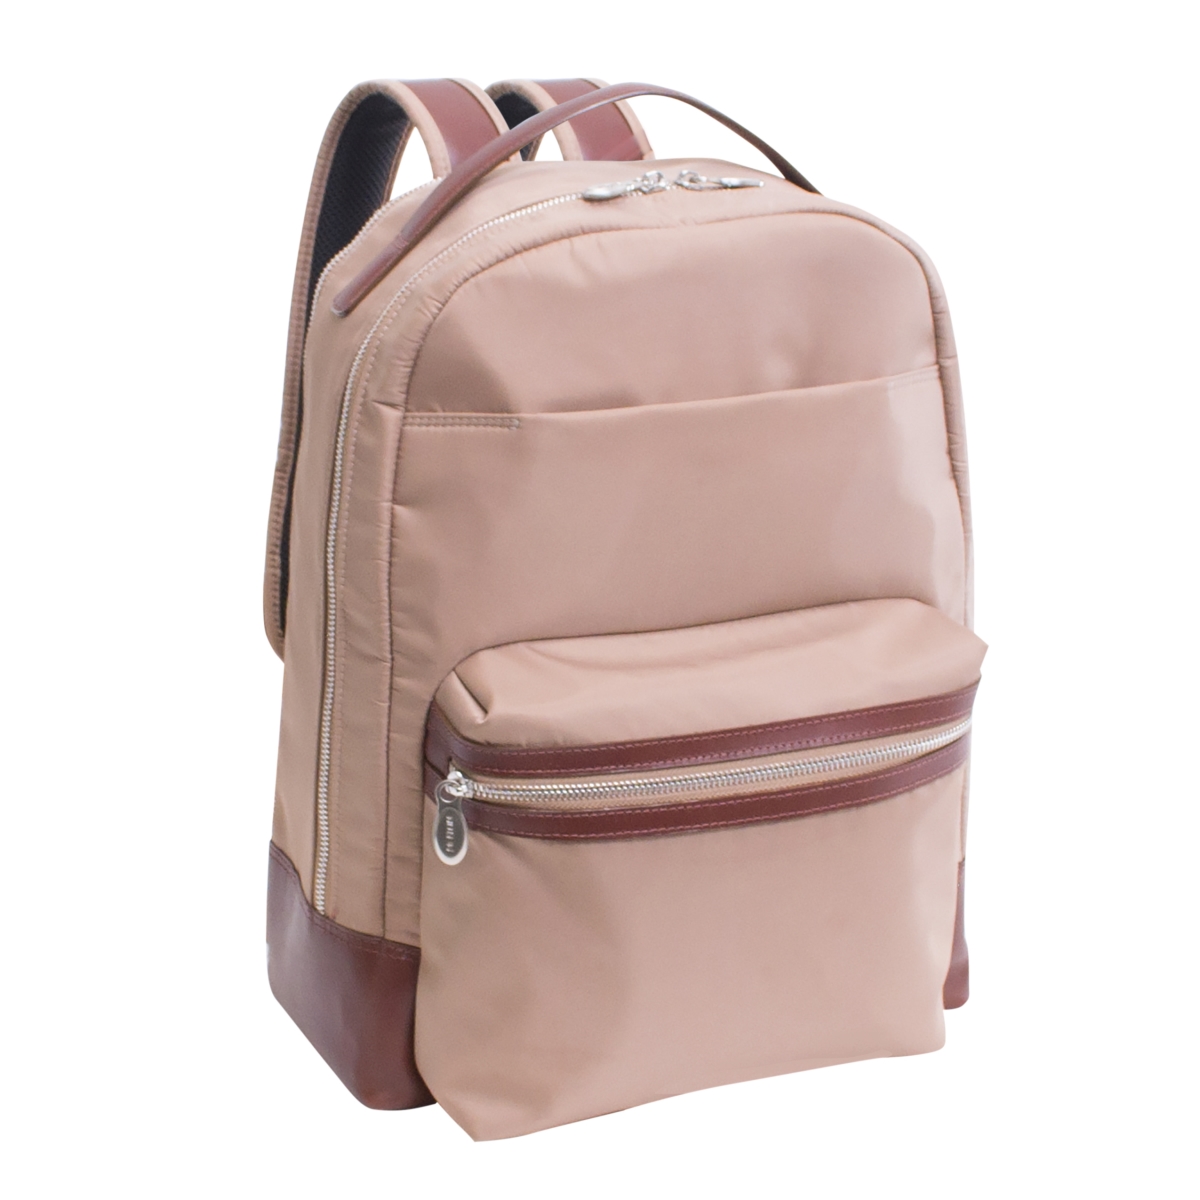 Mcklein Usa 18554 15 In. Parker Nylon Dual Compartment Laptop Backpack, Khaki